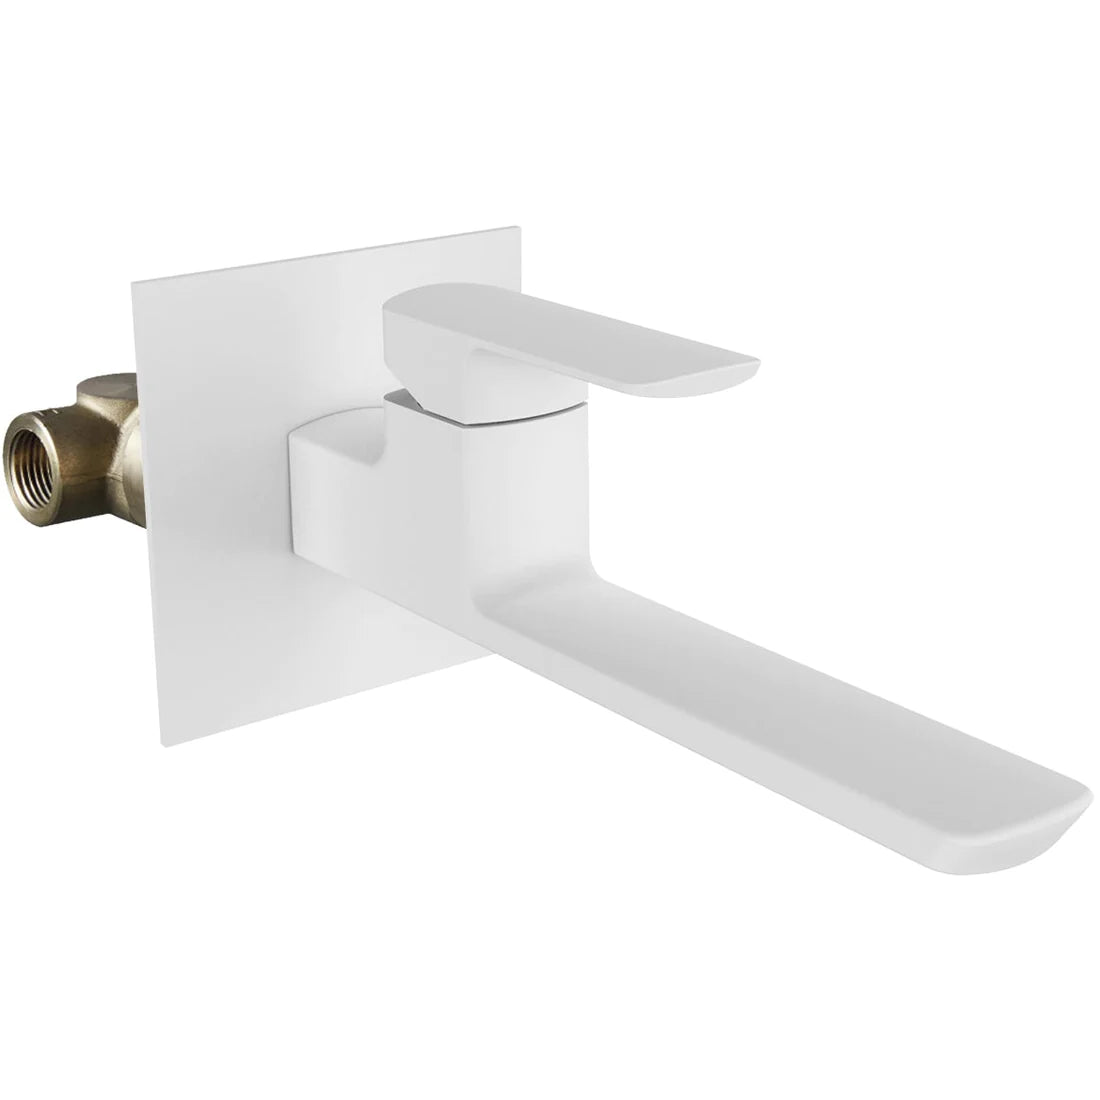 PierDeco Design MIS Wall-mounted Single-lever Washbasin Faucet